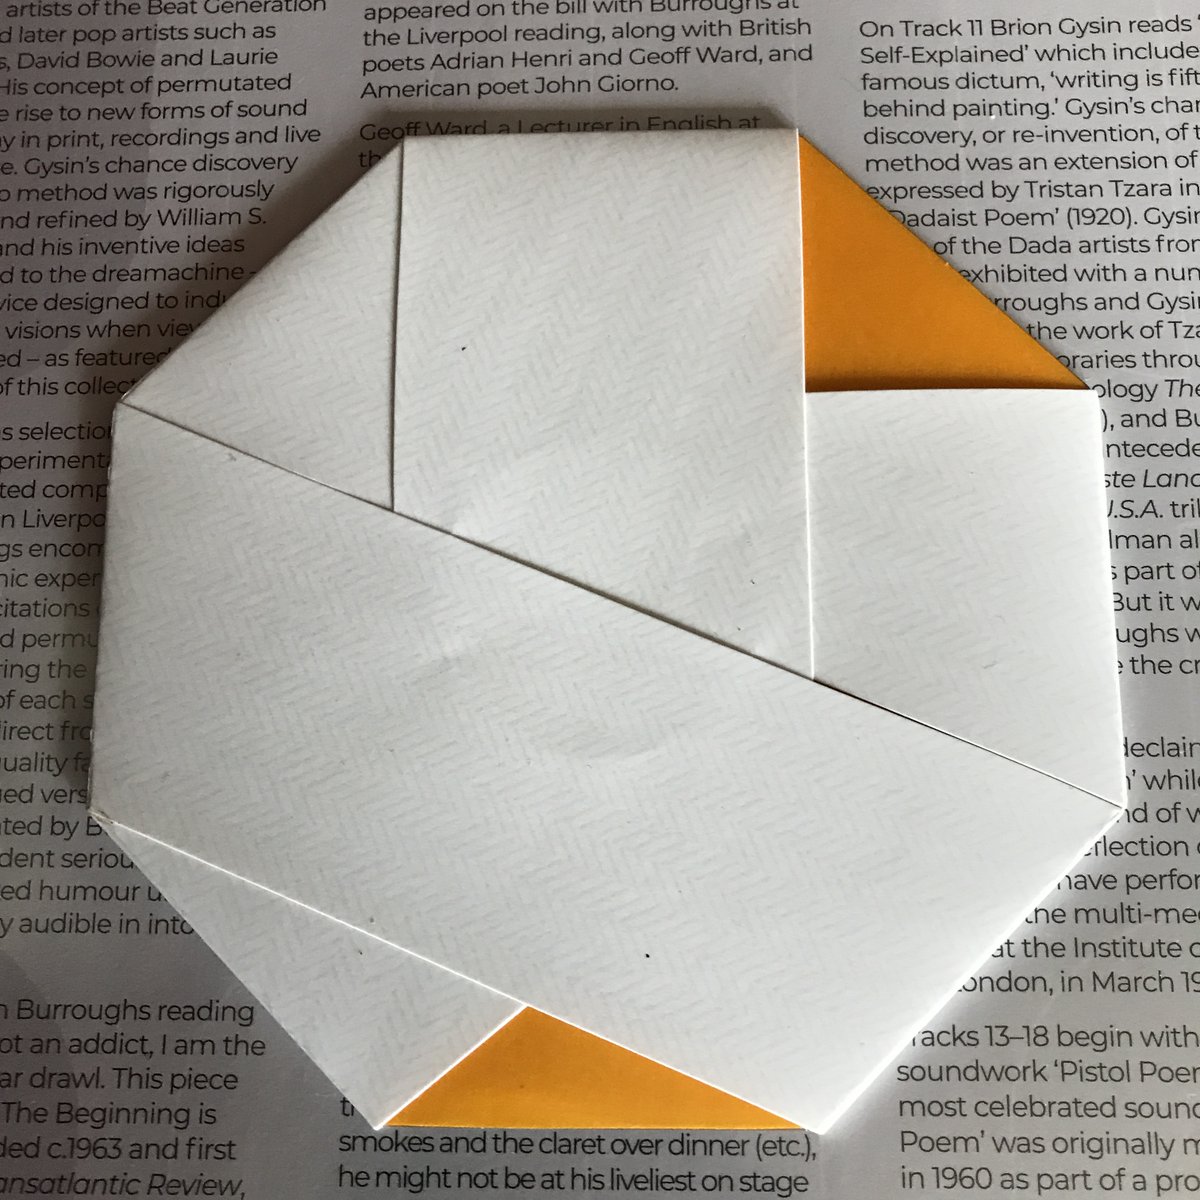 Postman delivered SoiSong's qXn94… CD EP, a Peter Christopherson and Ivan Pavlov EP I missed. But seriously how do I open it?

#origami #coil #PeterChristopherson